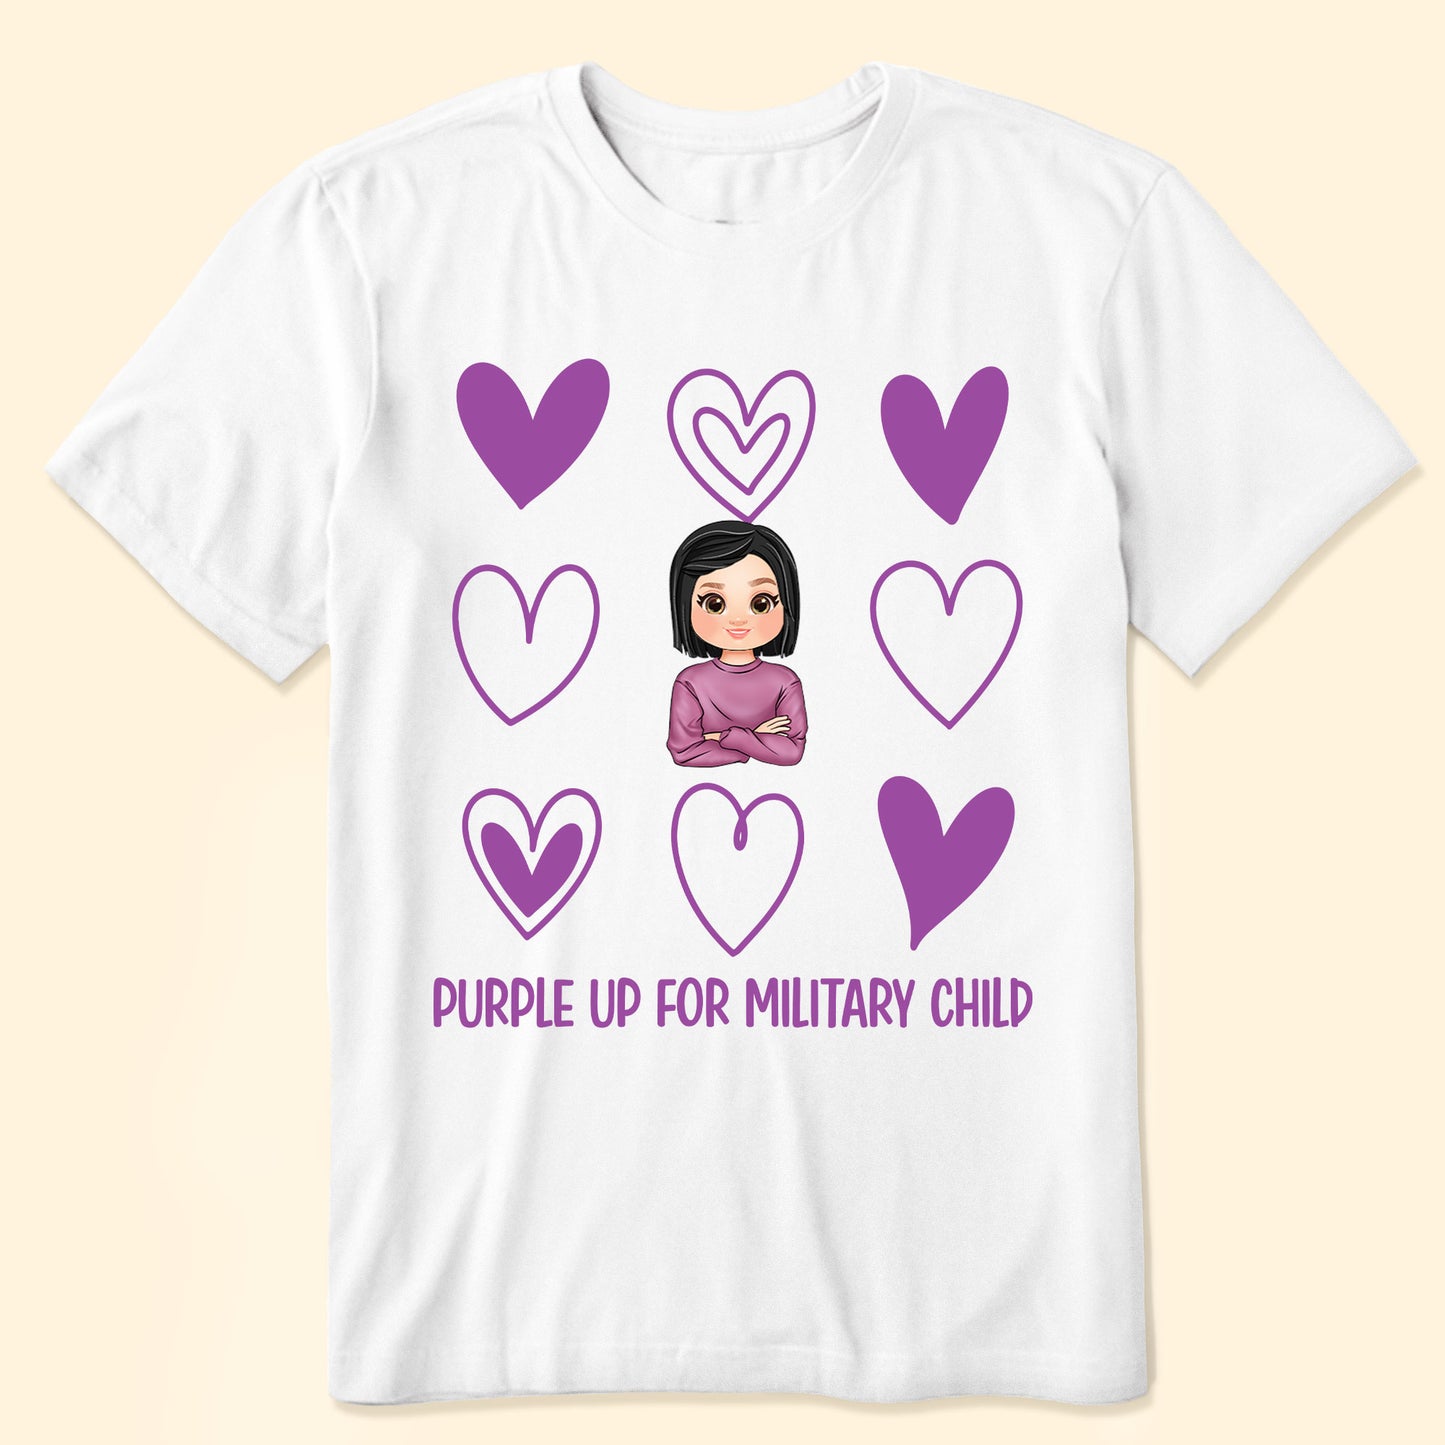 Purple Up For Military Child - Personalized Shirt